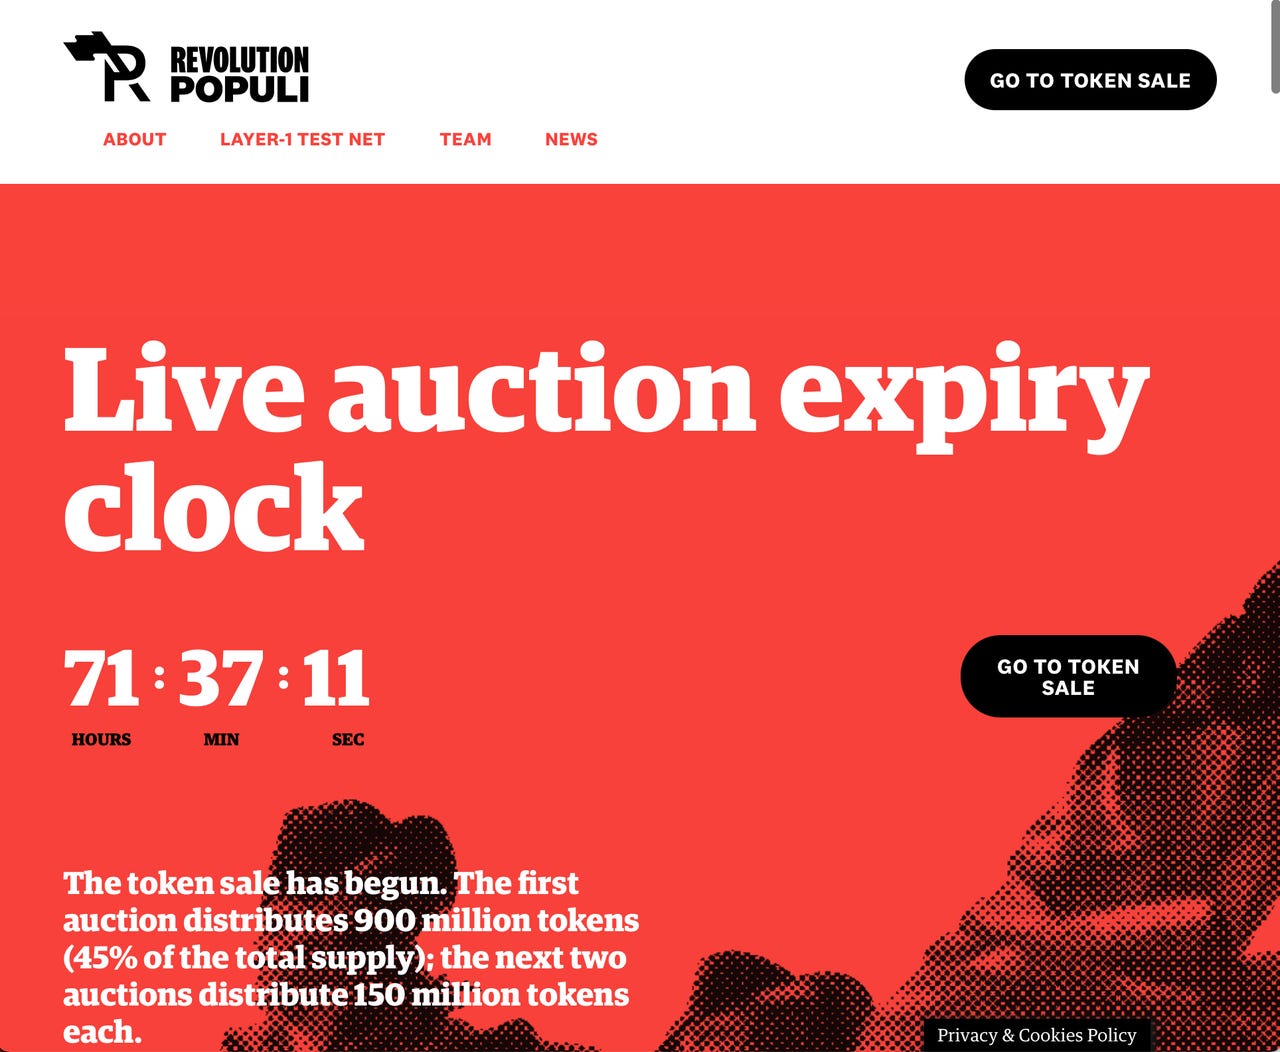 revpop-home-page-token-auction-march-15th-2021.png